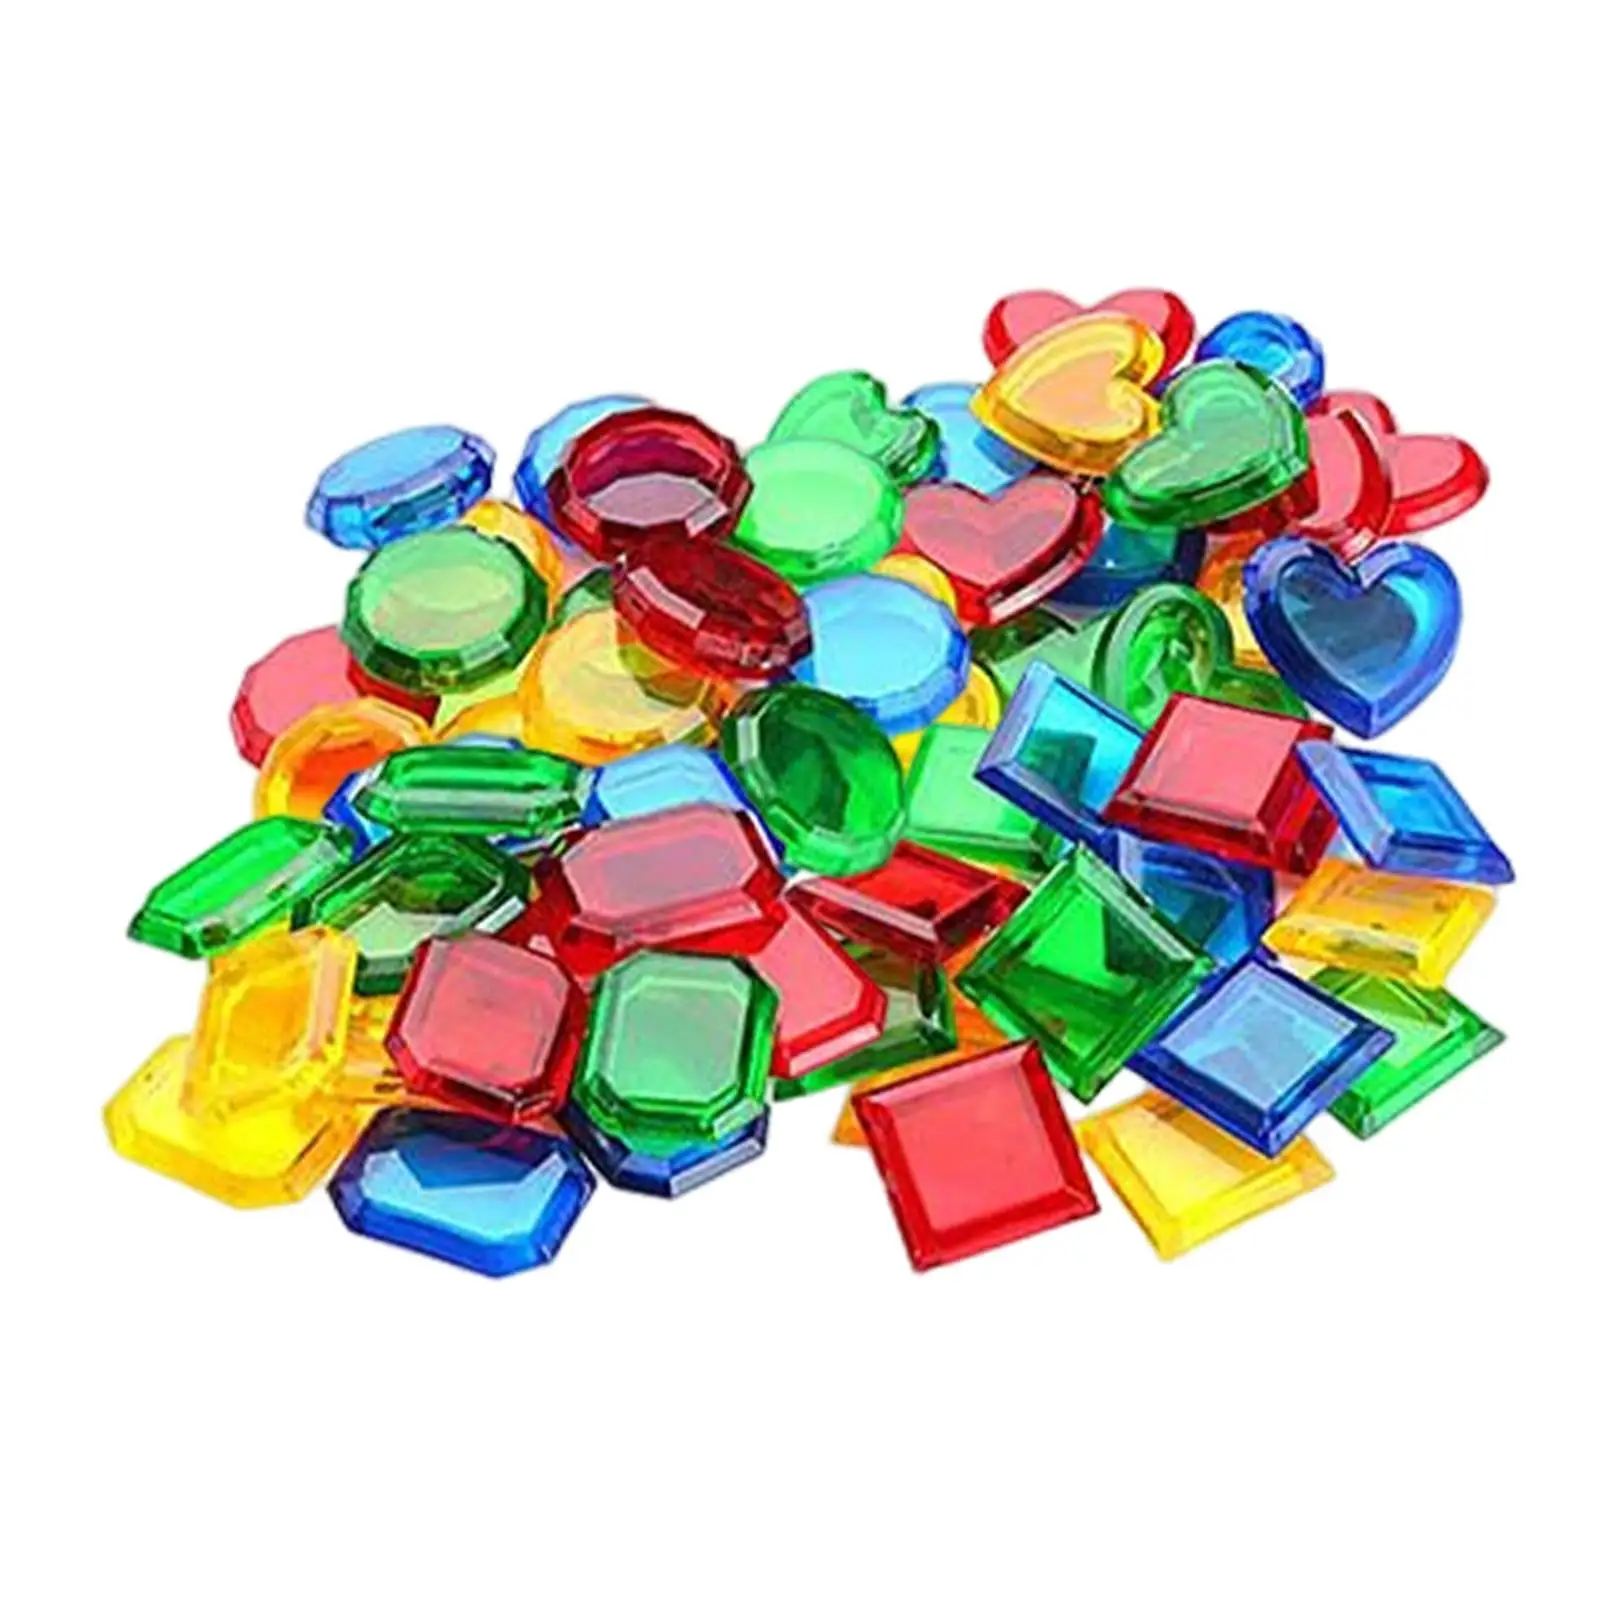 32Pcs Dive Throw Toy Acrylic Present Cognitive for Activity Family Preschool